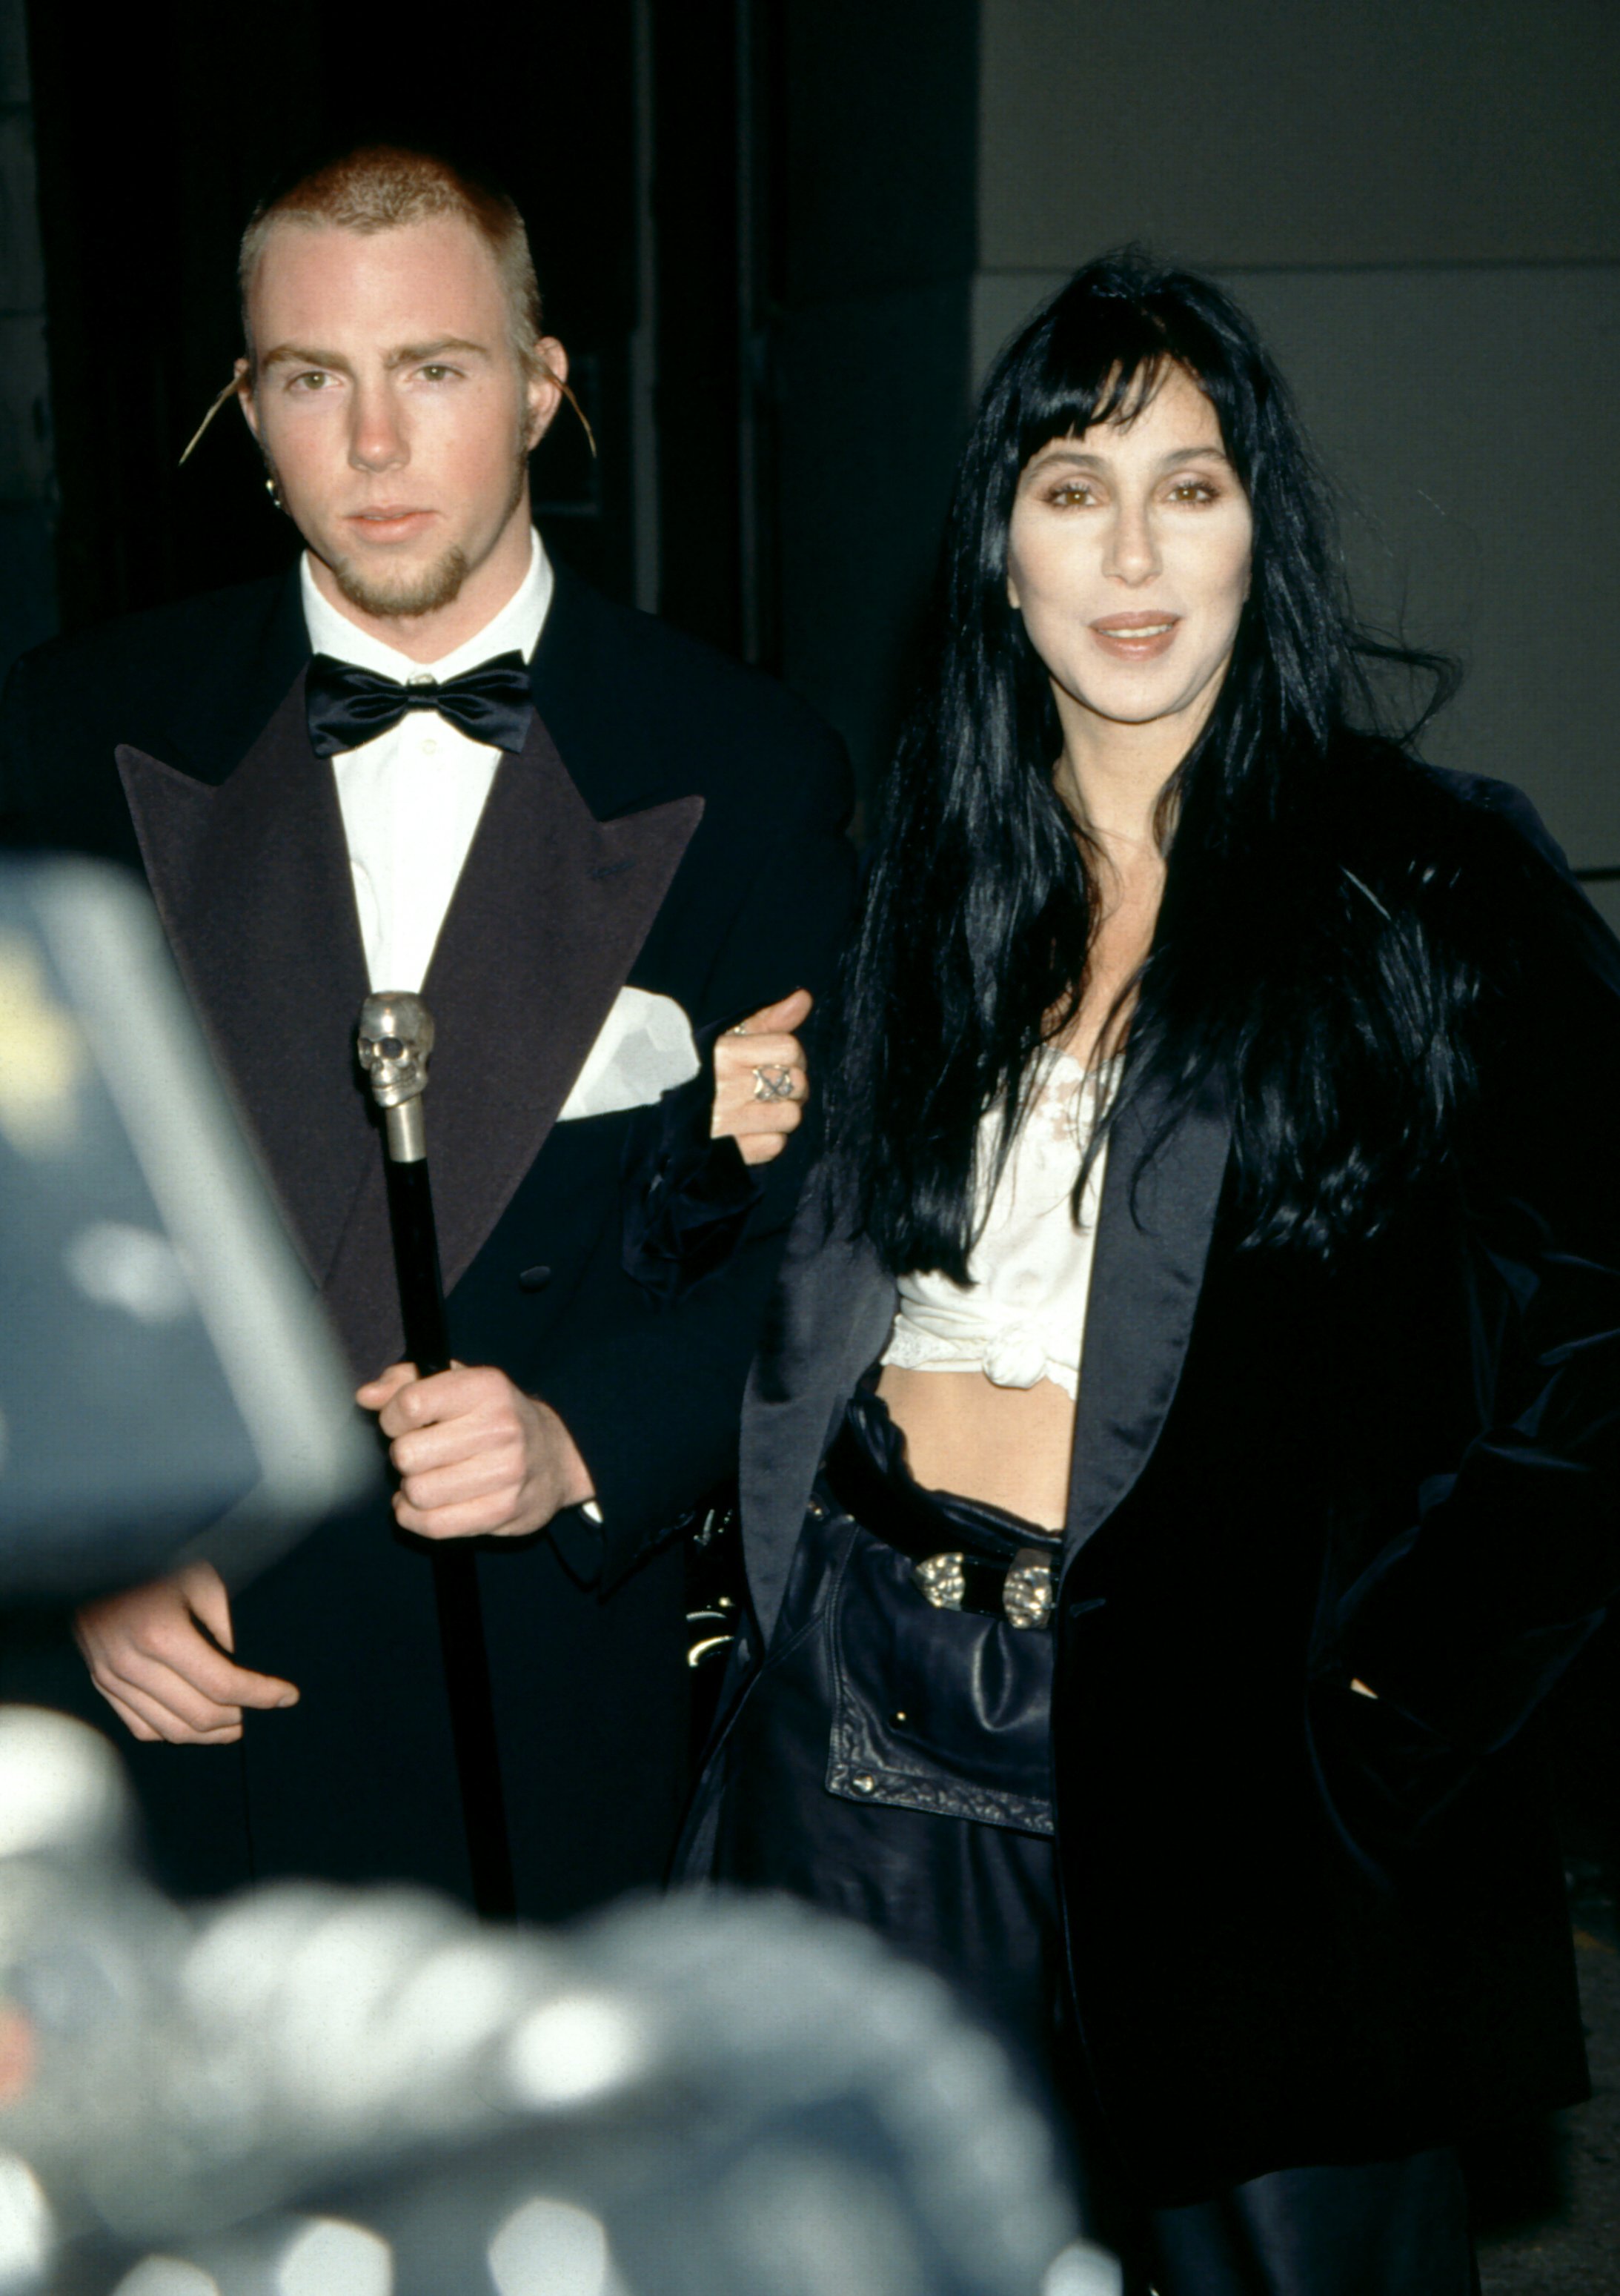 Elijah Blue Allman and his mother American singer and actress Cher attend the 5th Annual Fire and Ice Ball to Benefit Revlon UCLA Women Cancer Center on December 7, 1994 at the 20th Century Fox Studios in Century City, California. | Source: Getty Images